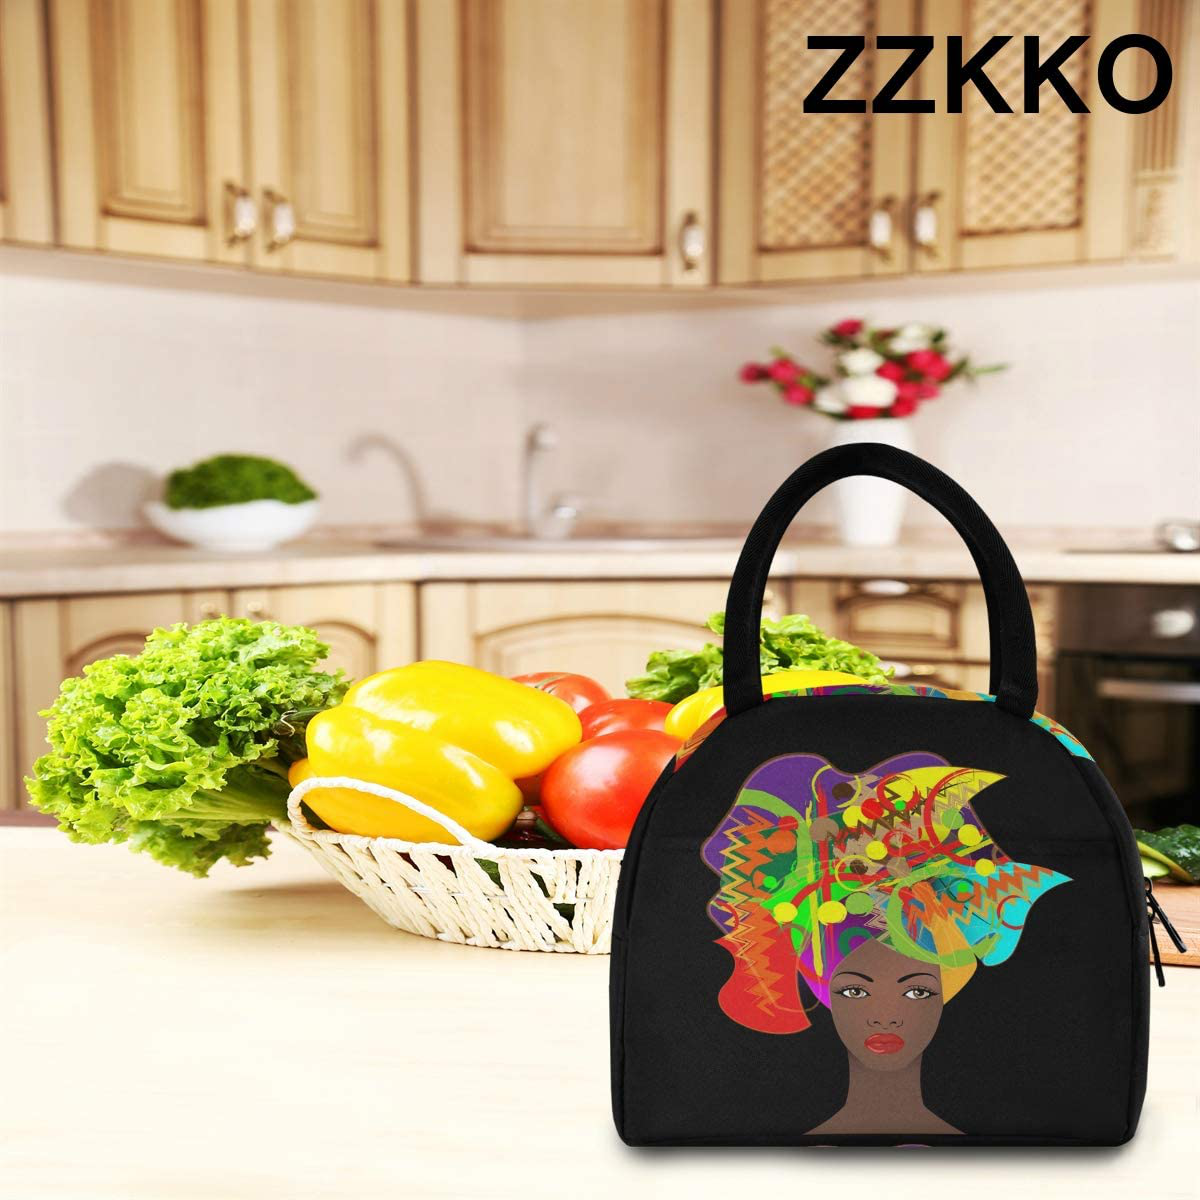 ZZKKO Leopard Animal Lunch Bag Box Tote Organizer Lunch Container Insulated Zipper Meal Prep Cooler Handbag For Women Men Home School Office Outdoor Use